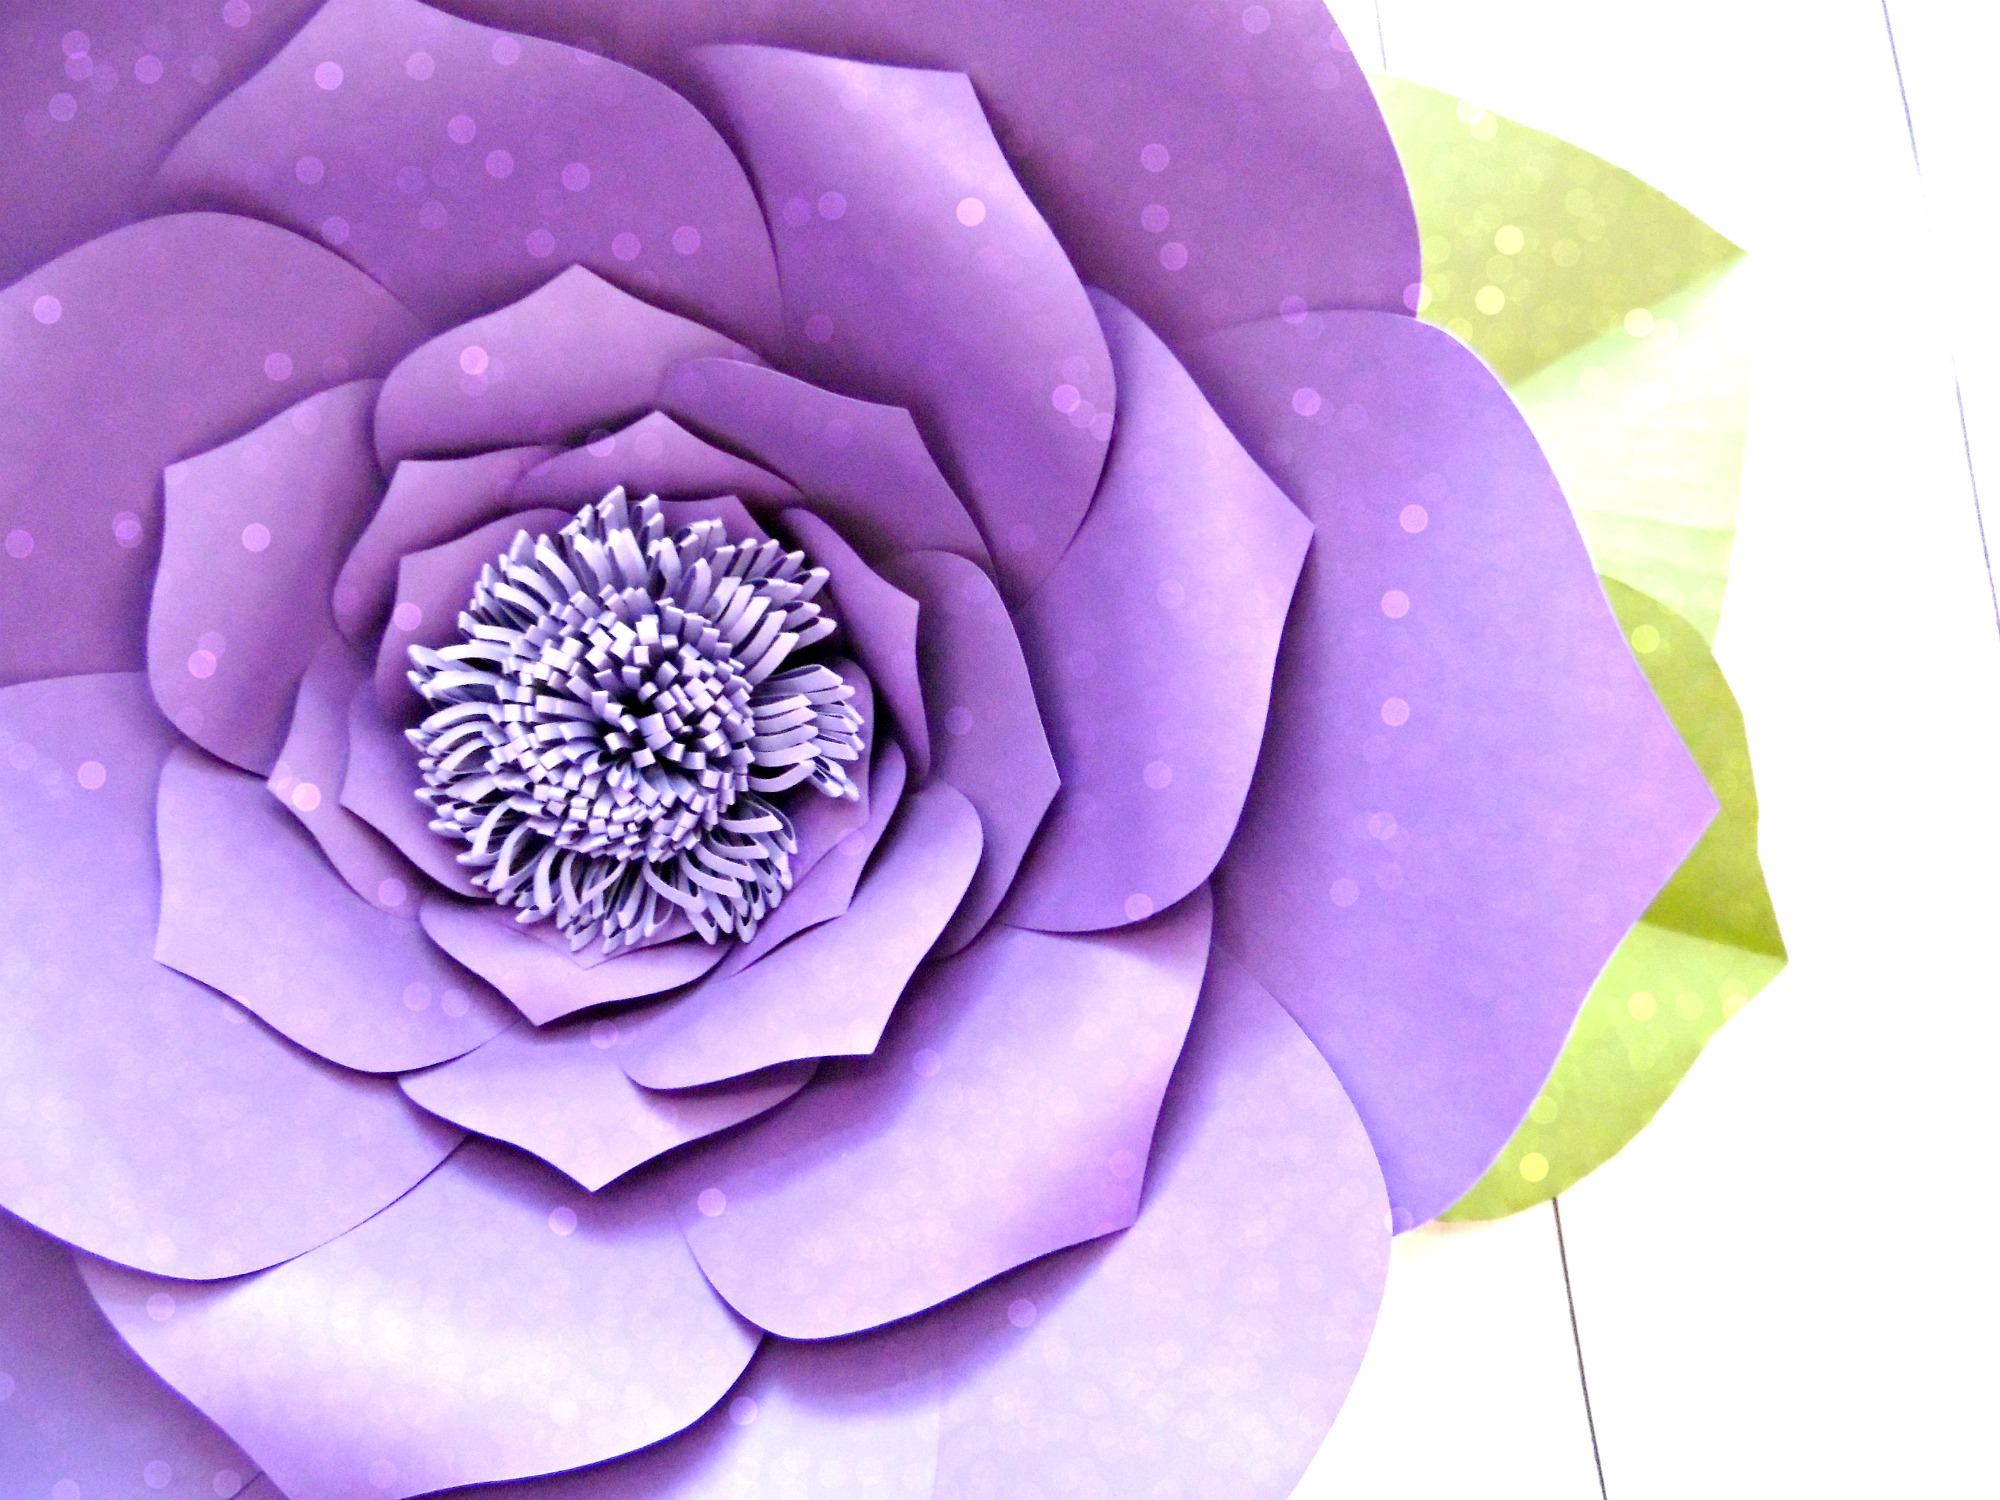 Free giant paper flower template for Cricut. Download the free paper flower svg templates and PDF printable patterns to make large backdrop paper flowers for weddings, parties, baby showers, home decor and more!